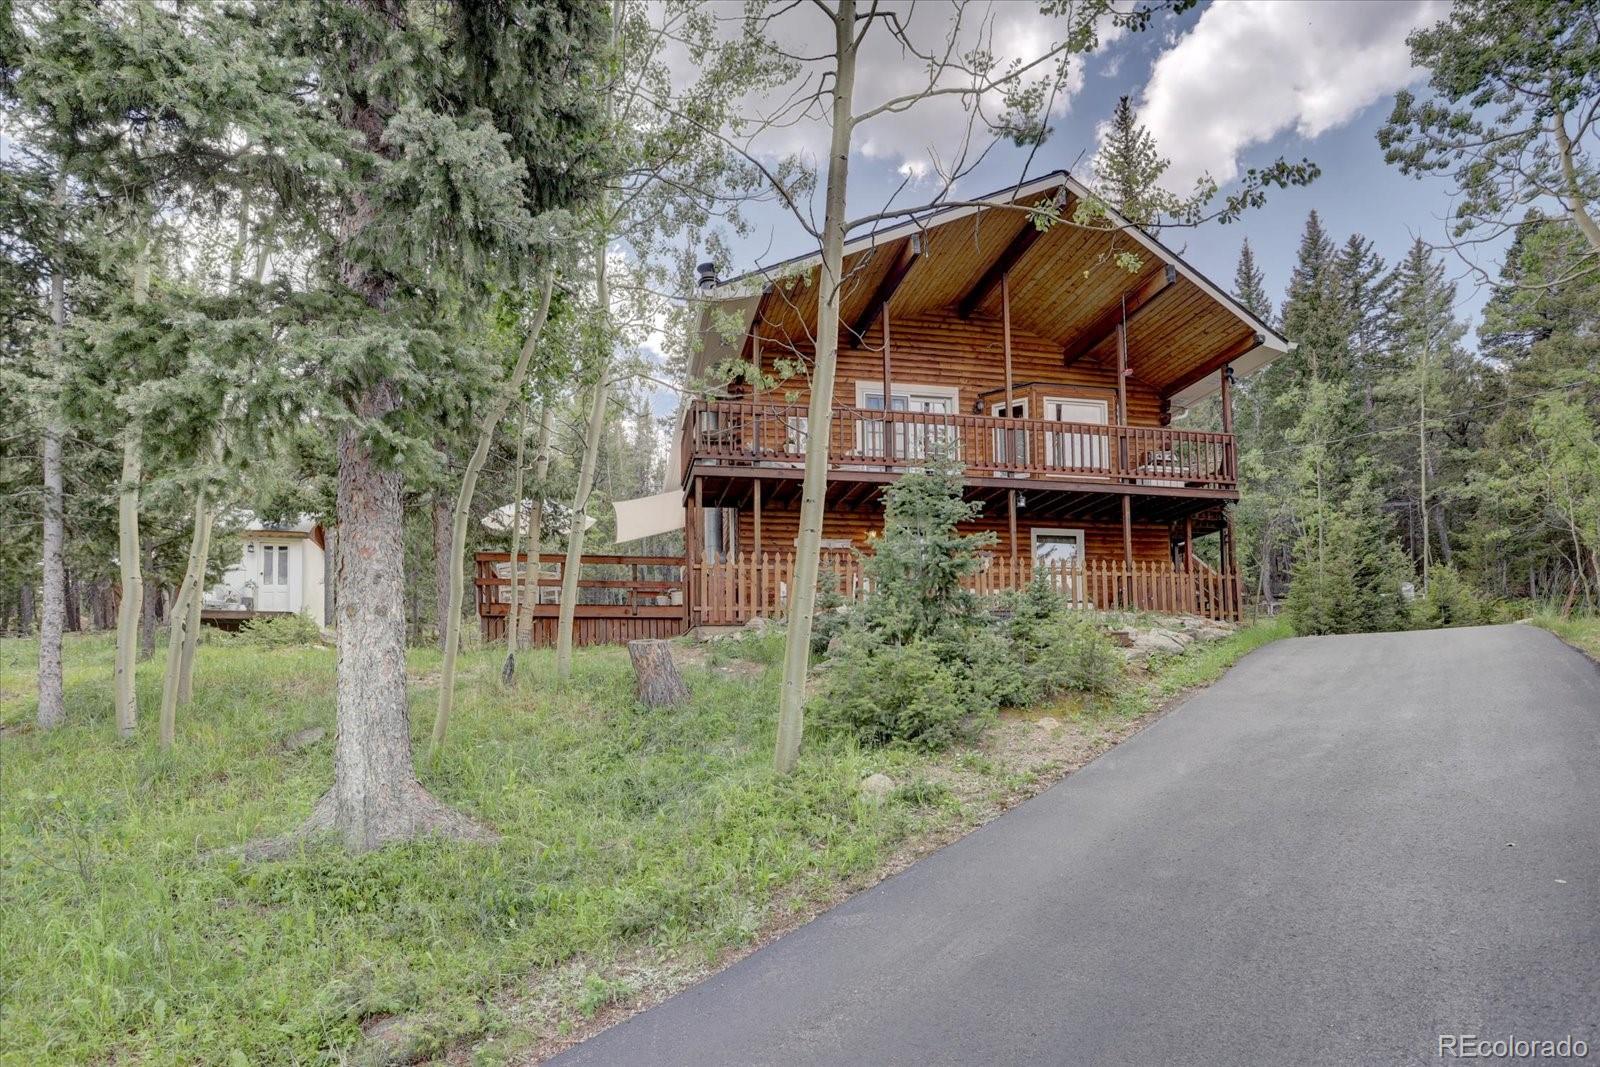 11437  nancys drive, Conifer sold home. Closed on 2023-12-28 for $718,500.